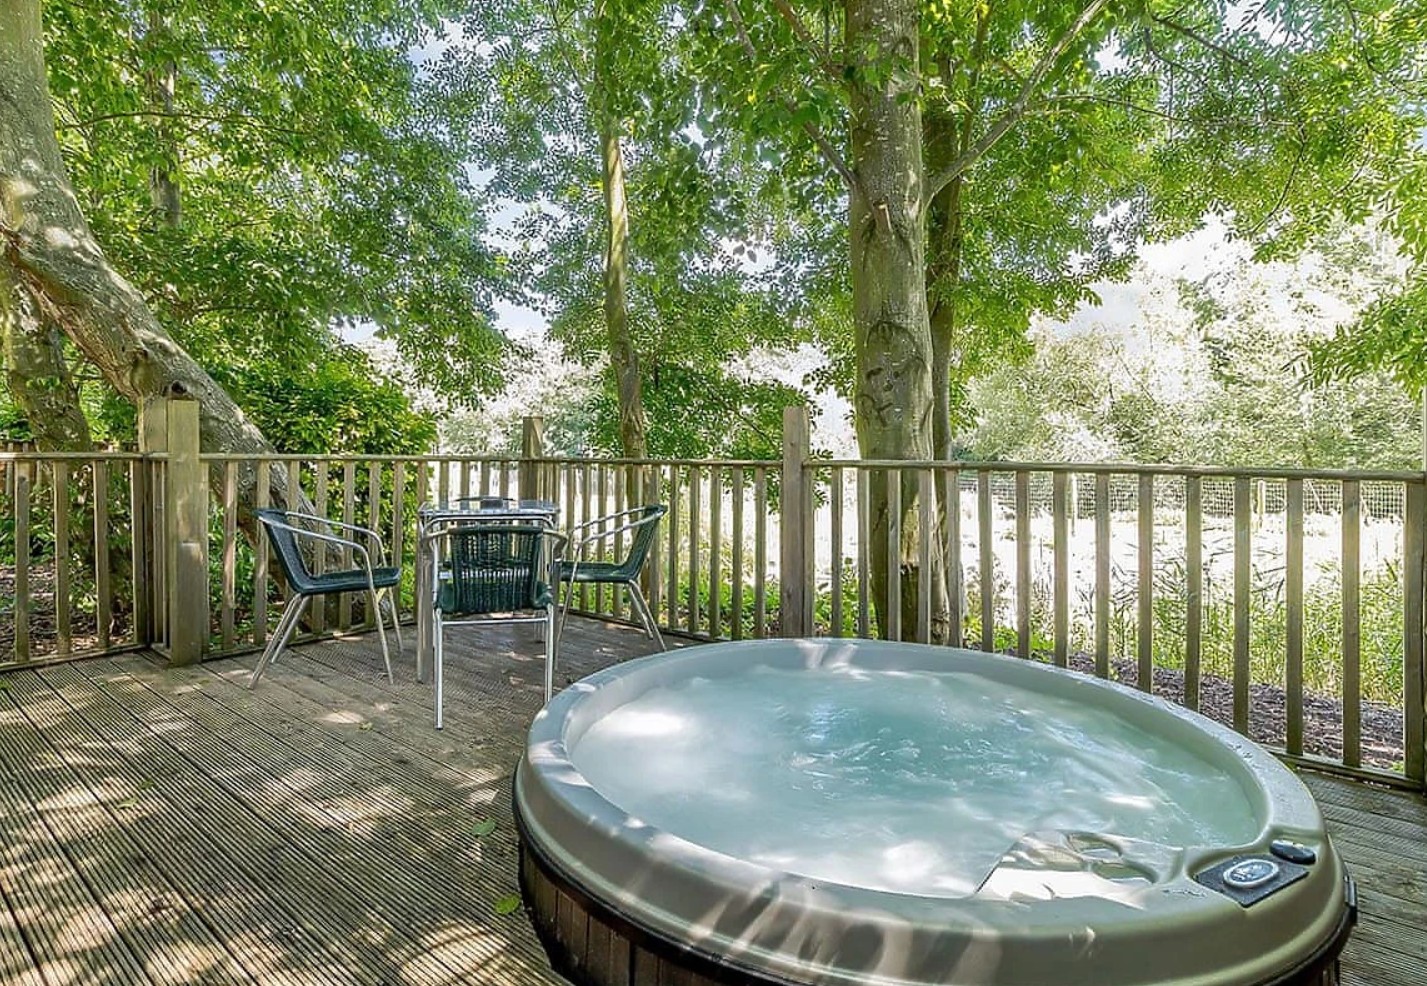 Rosewood Stud Park offers beautiful hot tubs with a view of Ely